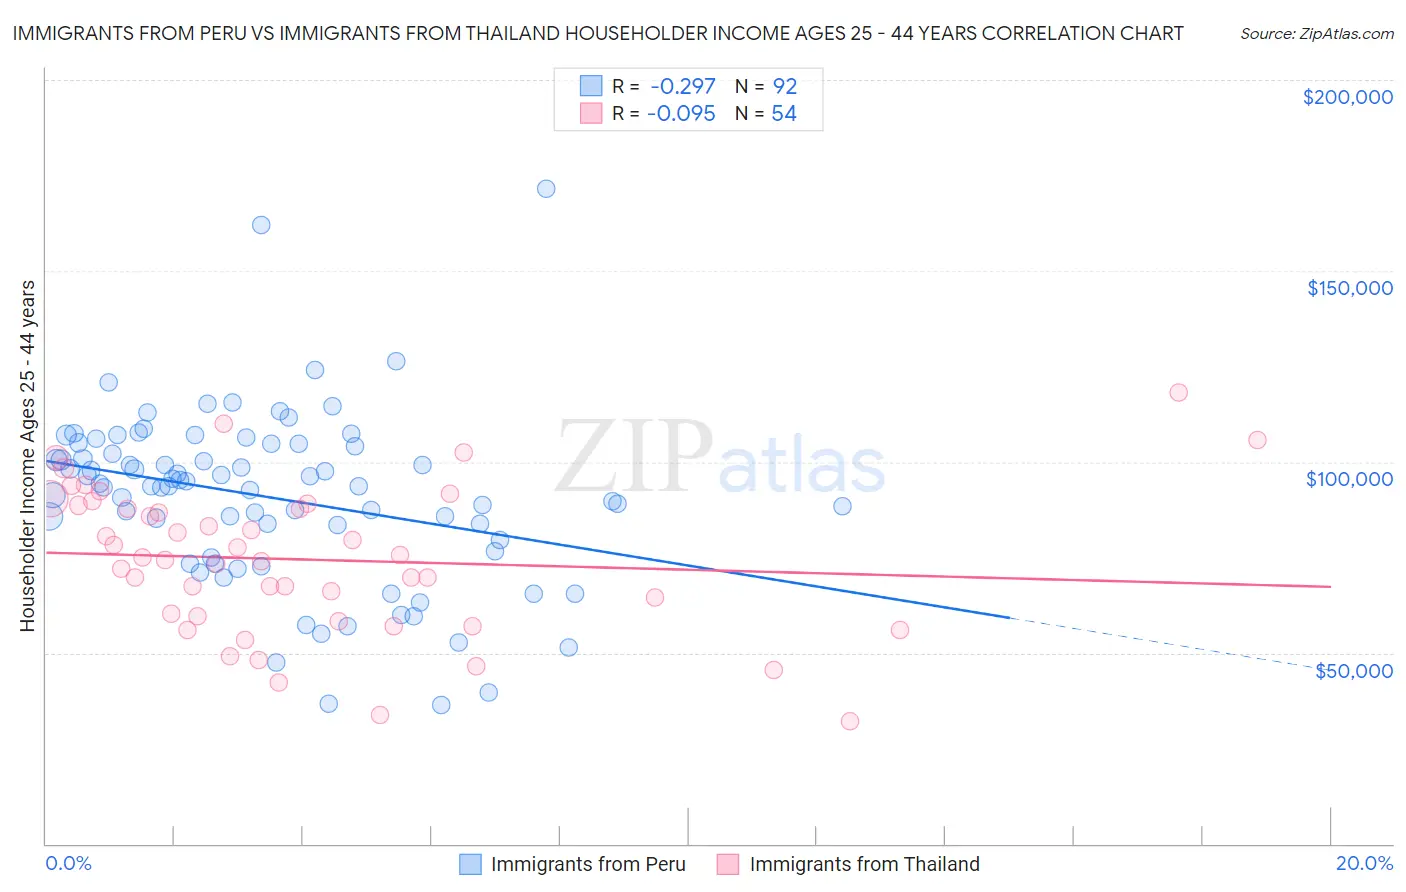 Immigrants from Peru vs Immigrants from Thailand Householder Income Ages 25 - 44 years